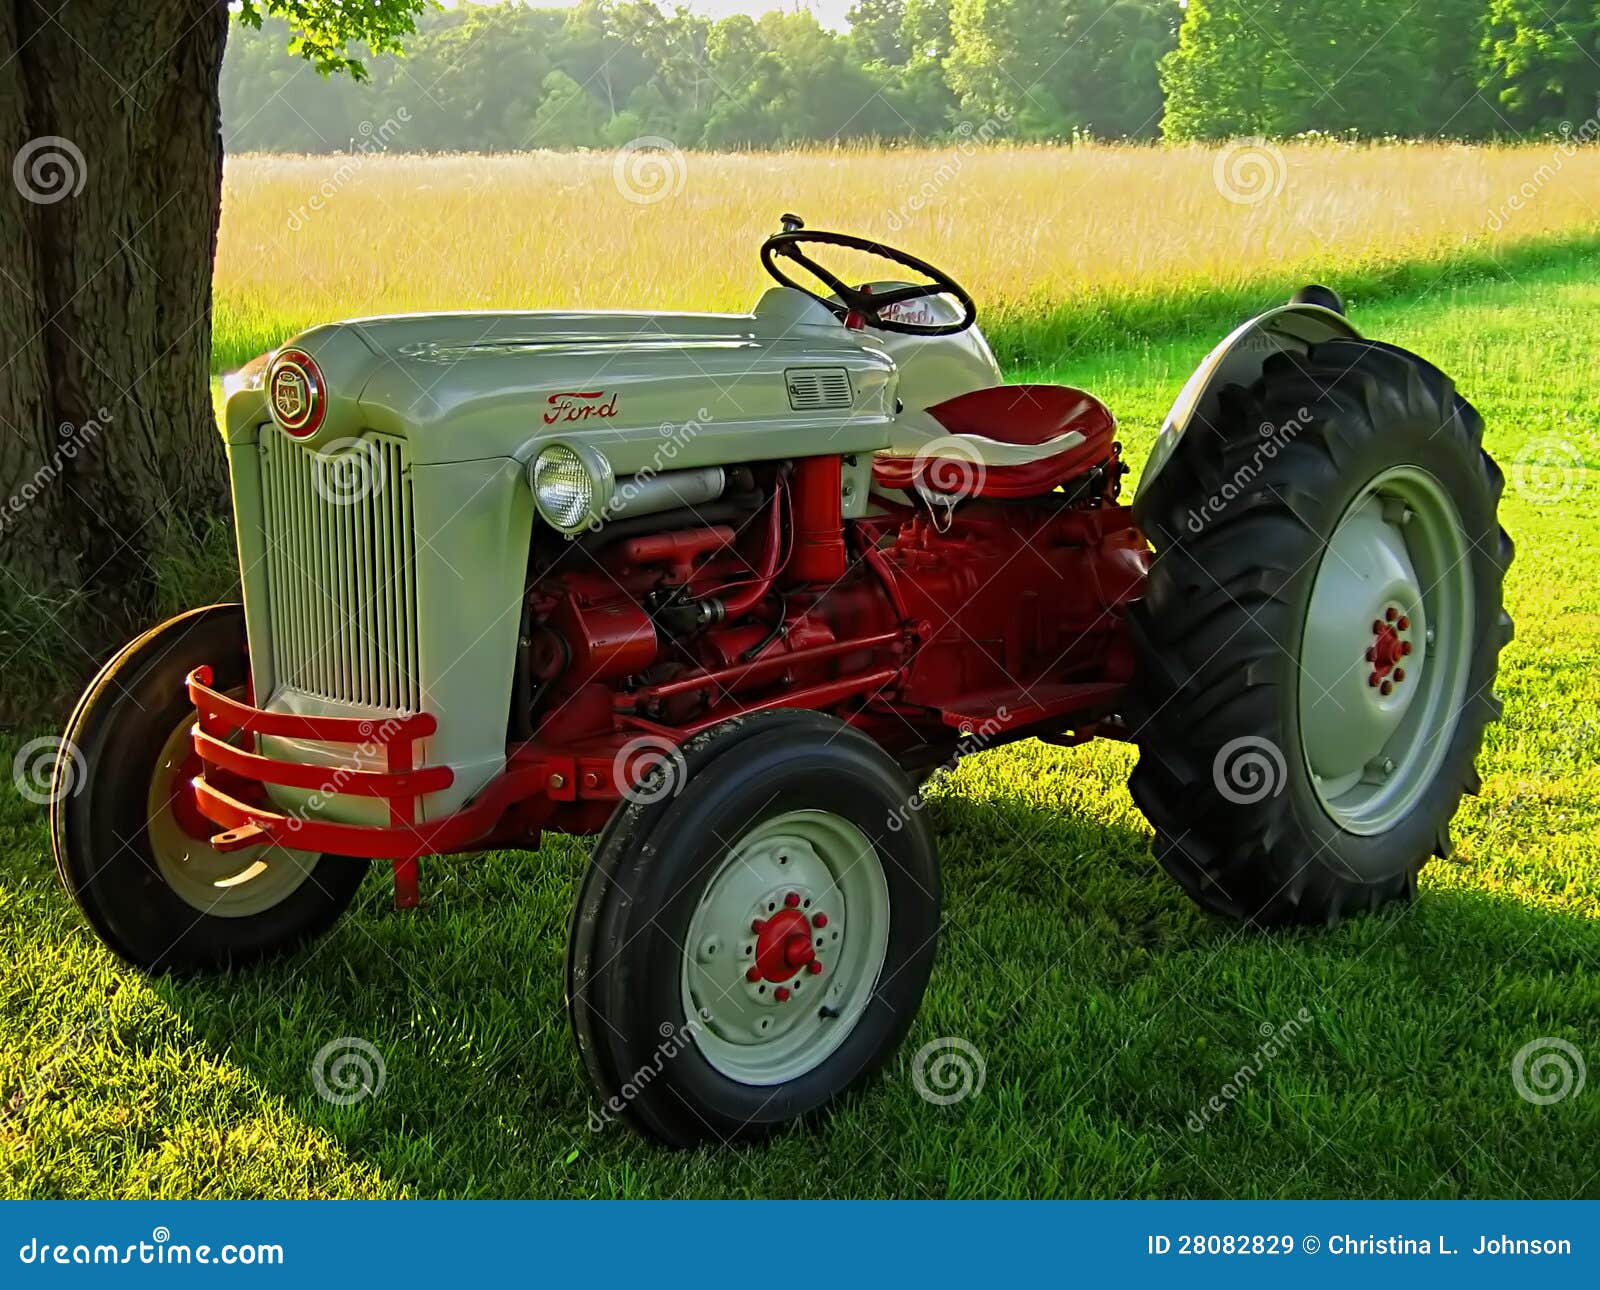 Vintage ford tractor identification #1